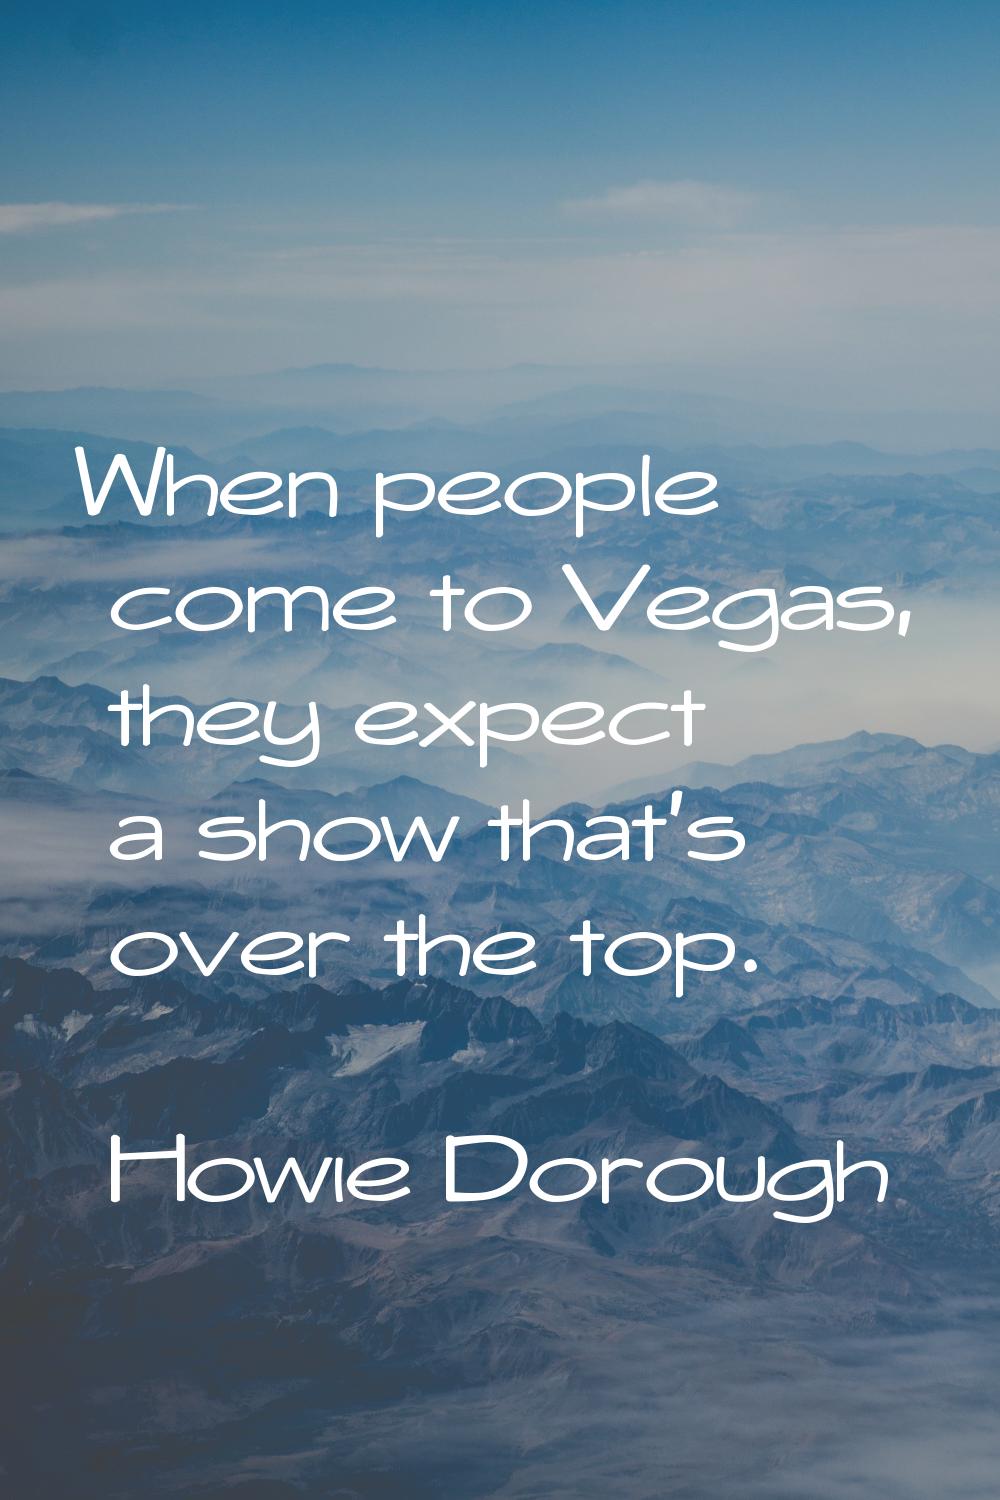 When people come to Vegas, they expect a show that's over the top.